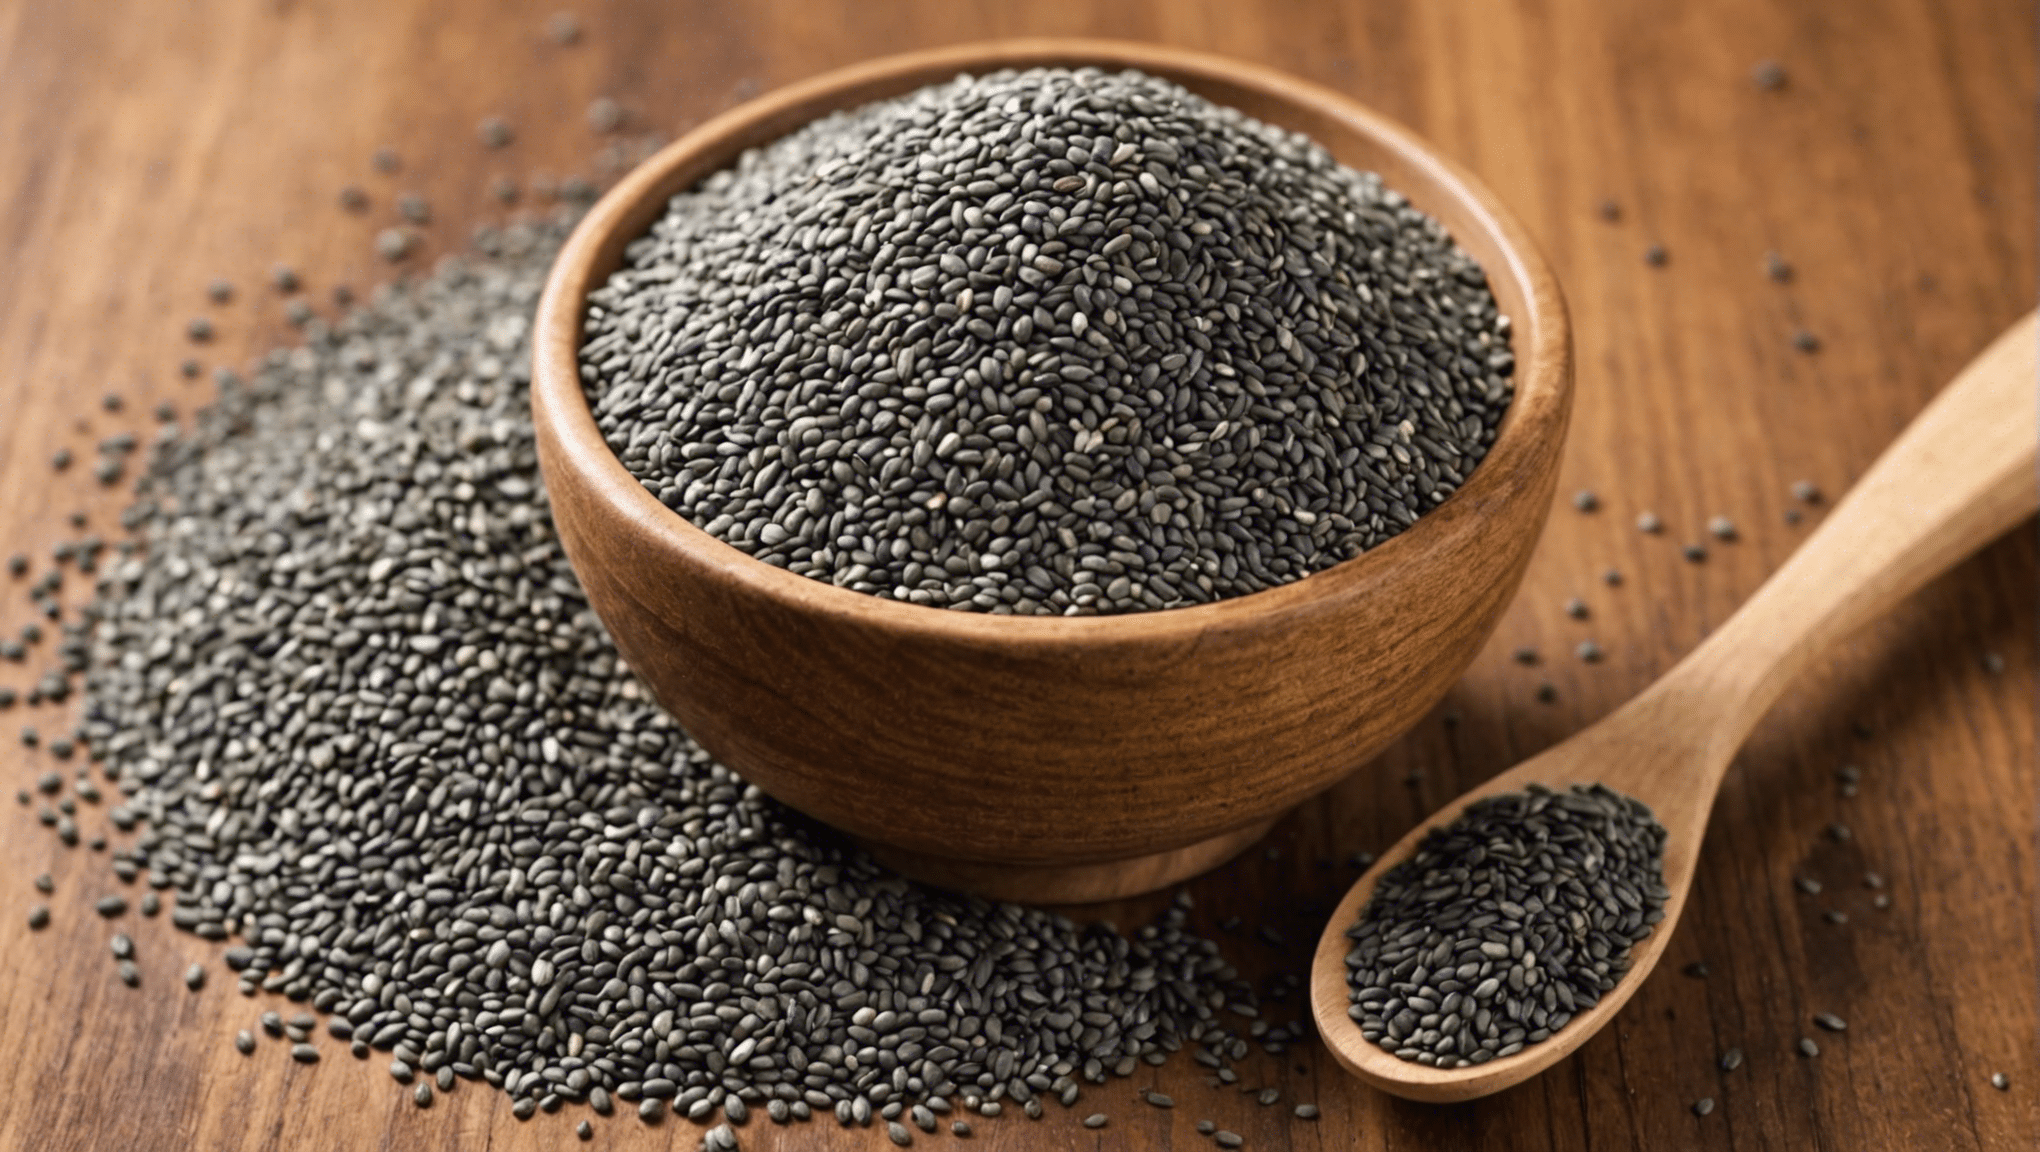 discover whether chia seeds can spoil and the best storage practices with this comprehensive guide on 'do chia seeds go bad?